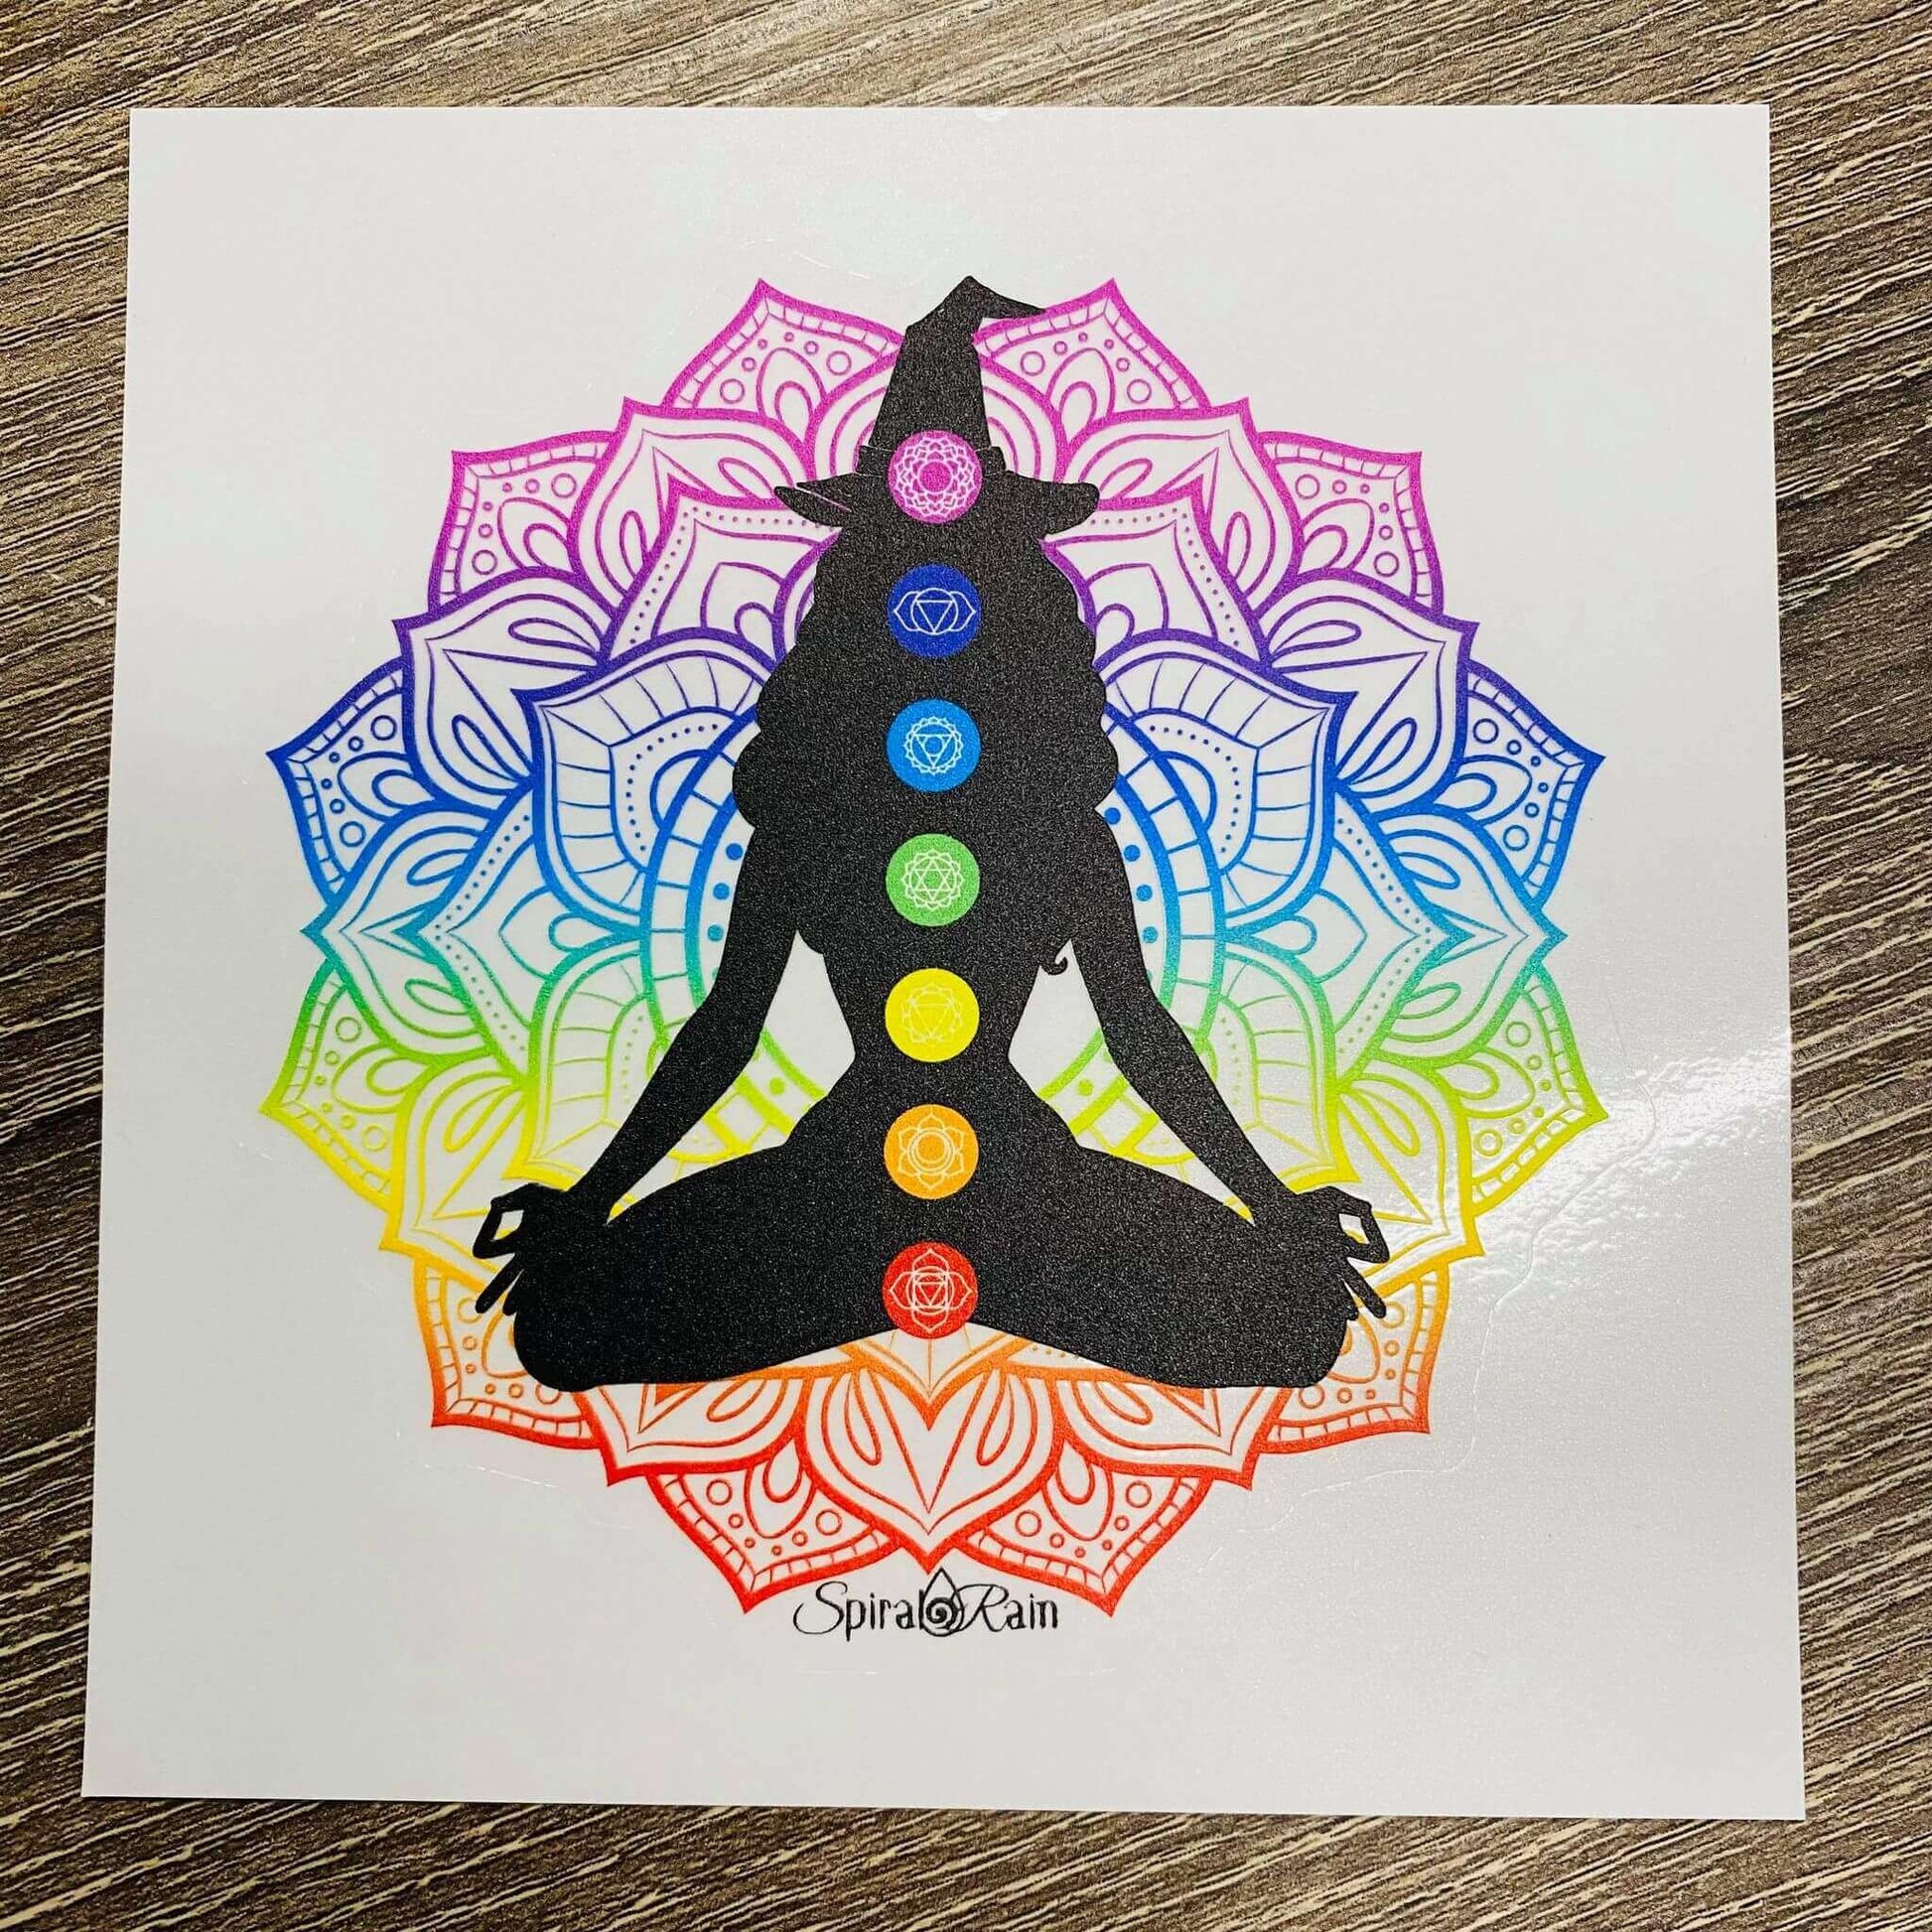 Chakra Witch Vinyl Sticker at $3 only from Spiral Rain